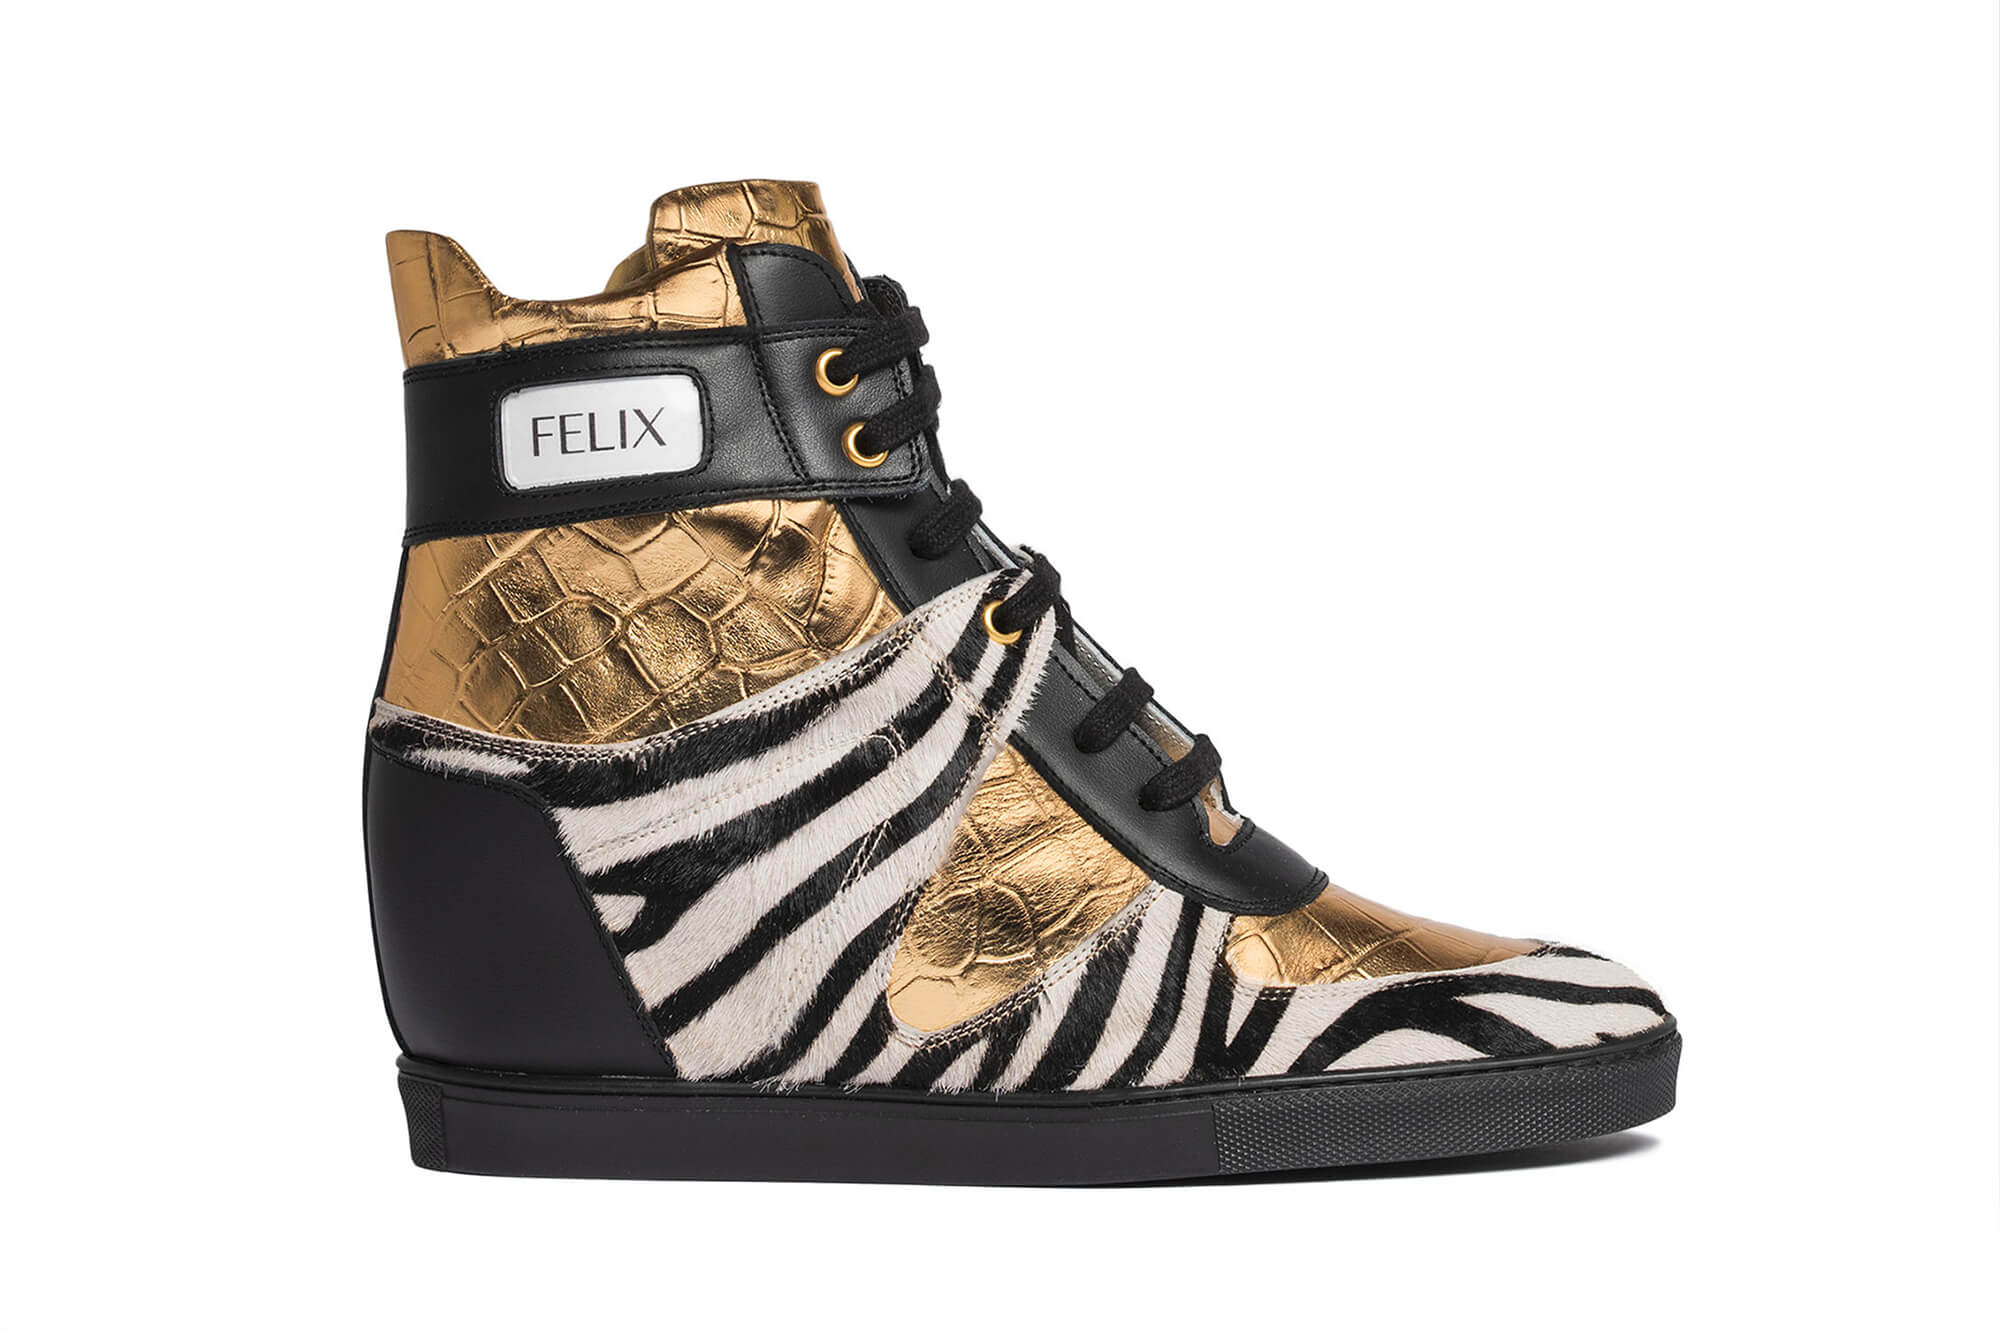 FELIX customized made in Italy products by Felicia Ramirez